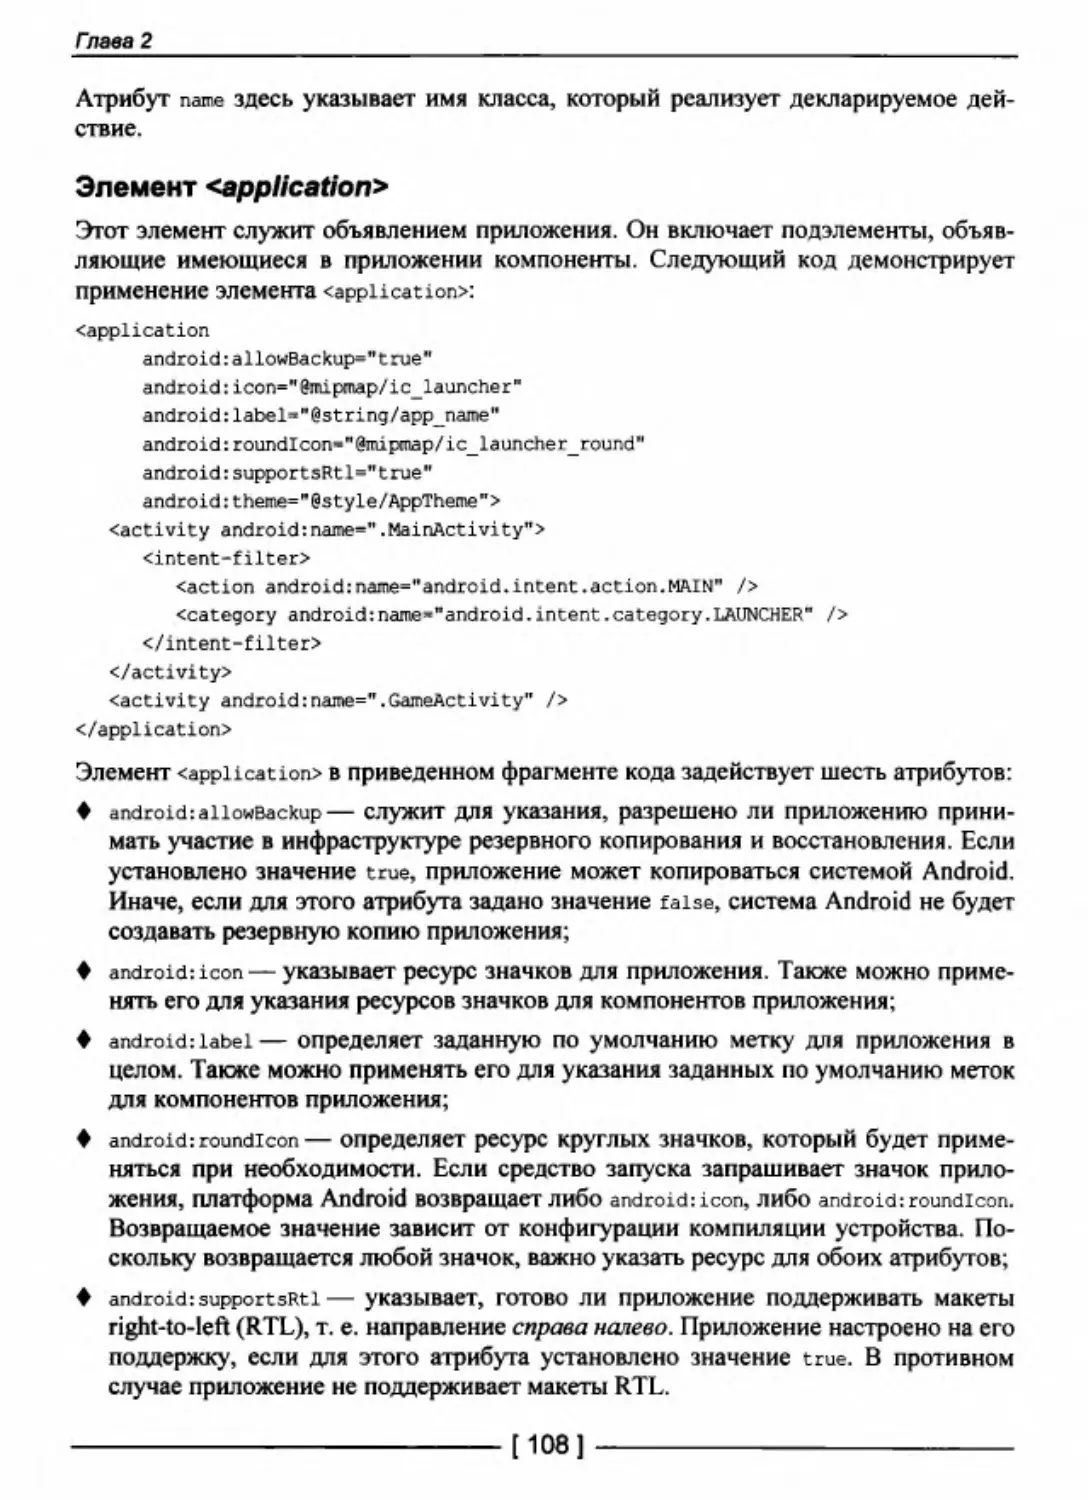 Элемент <application>